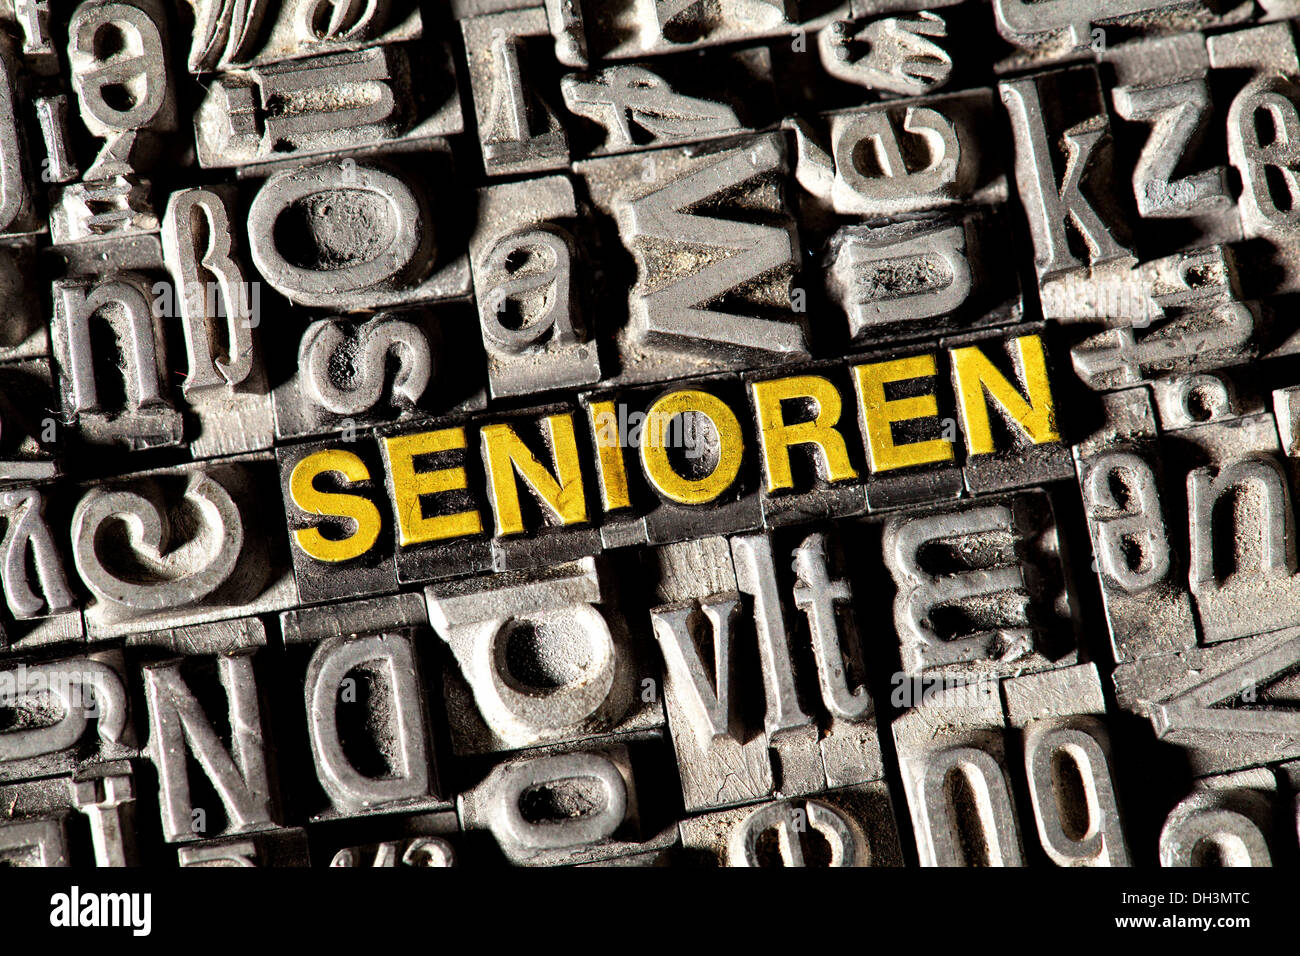 Old lead letters forming the word 'SENIOREN', German for 'SENIORS' Stock Photo